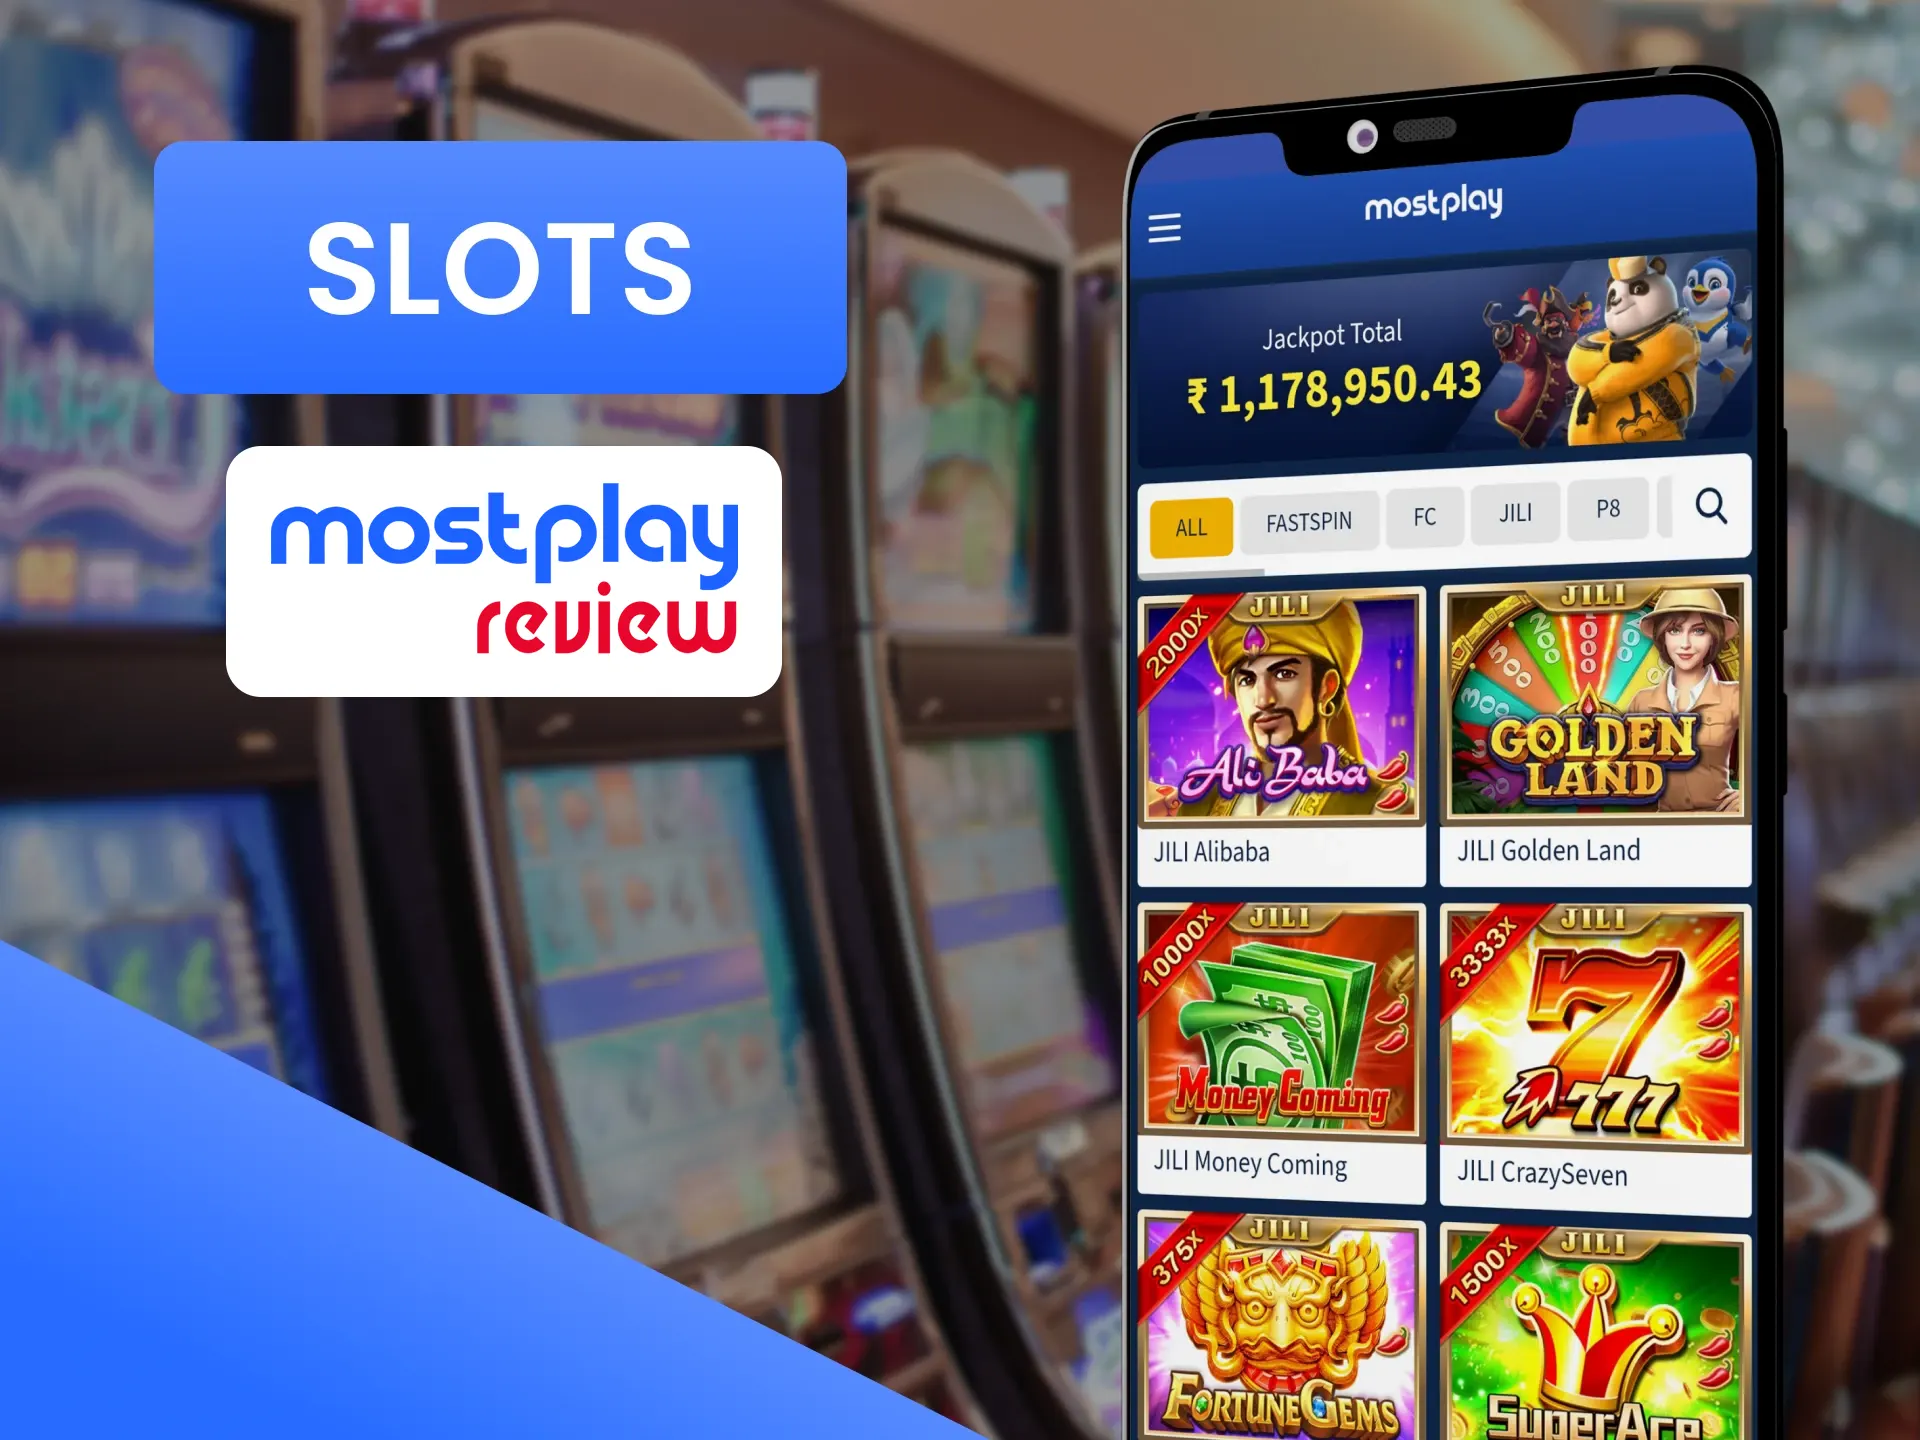 Search for new slots on the Mostplay live casino page.